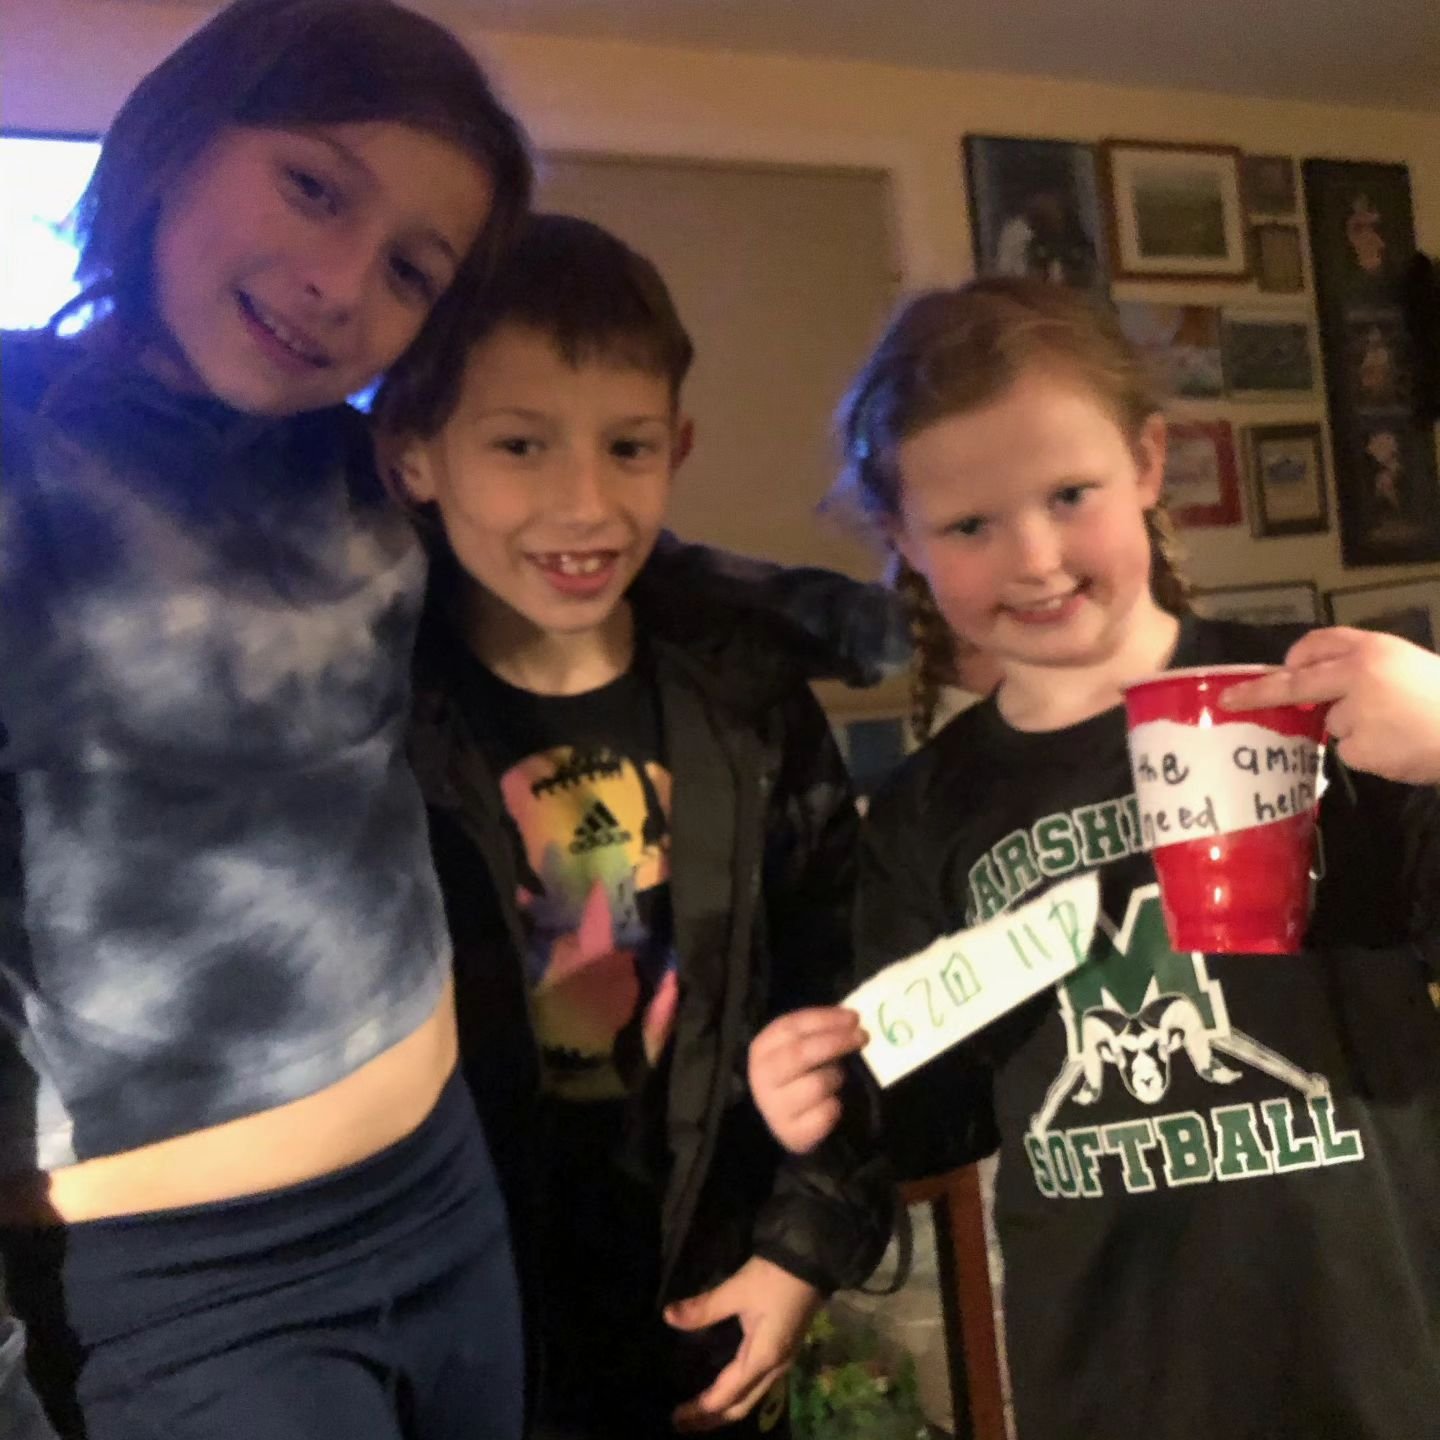 KIDS COME TO THE AID OF ANIMALS

These 3 children took up a collection for animals in a local neighborhood.
Pictured here with their donation is Jocelyn S. (holding the red cup), Skyla N. and Chase N.
We are grateful for the initiative of these fine 